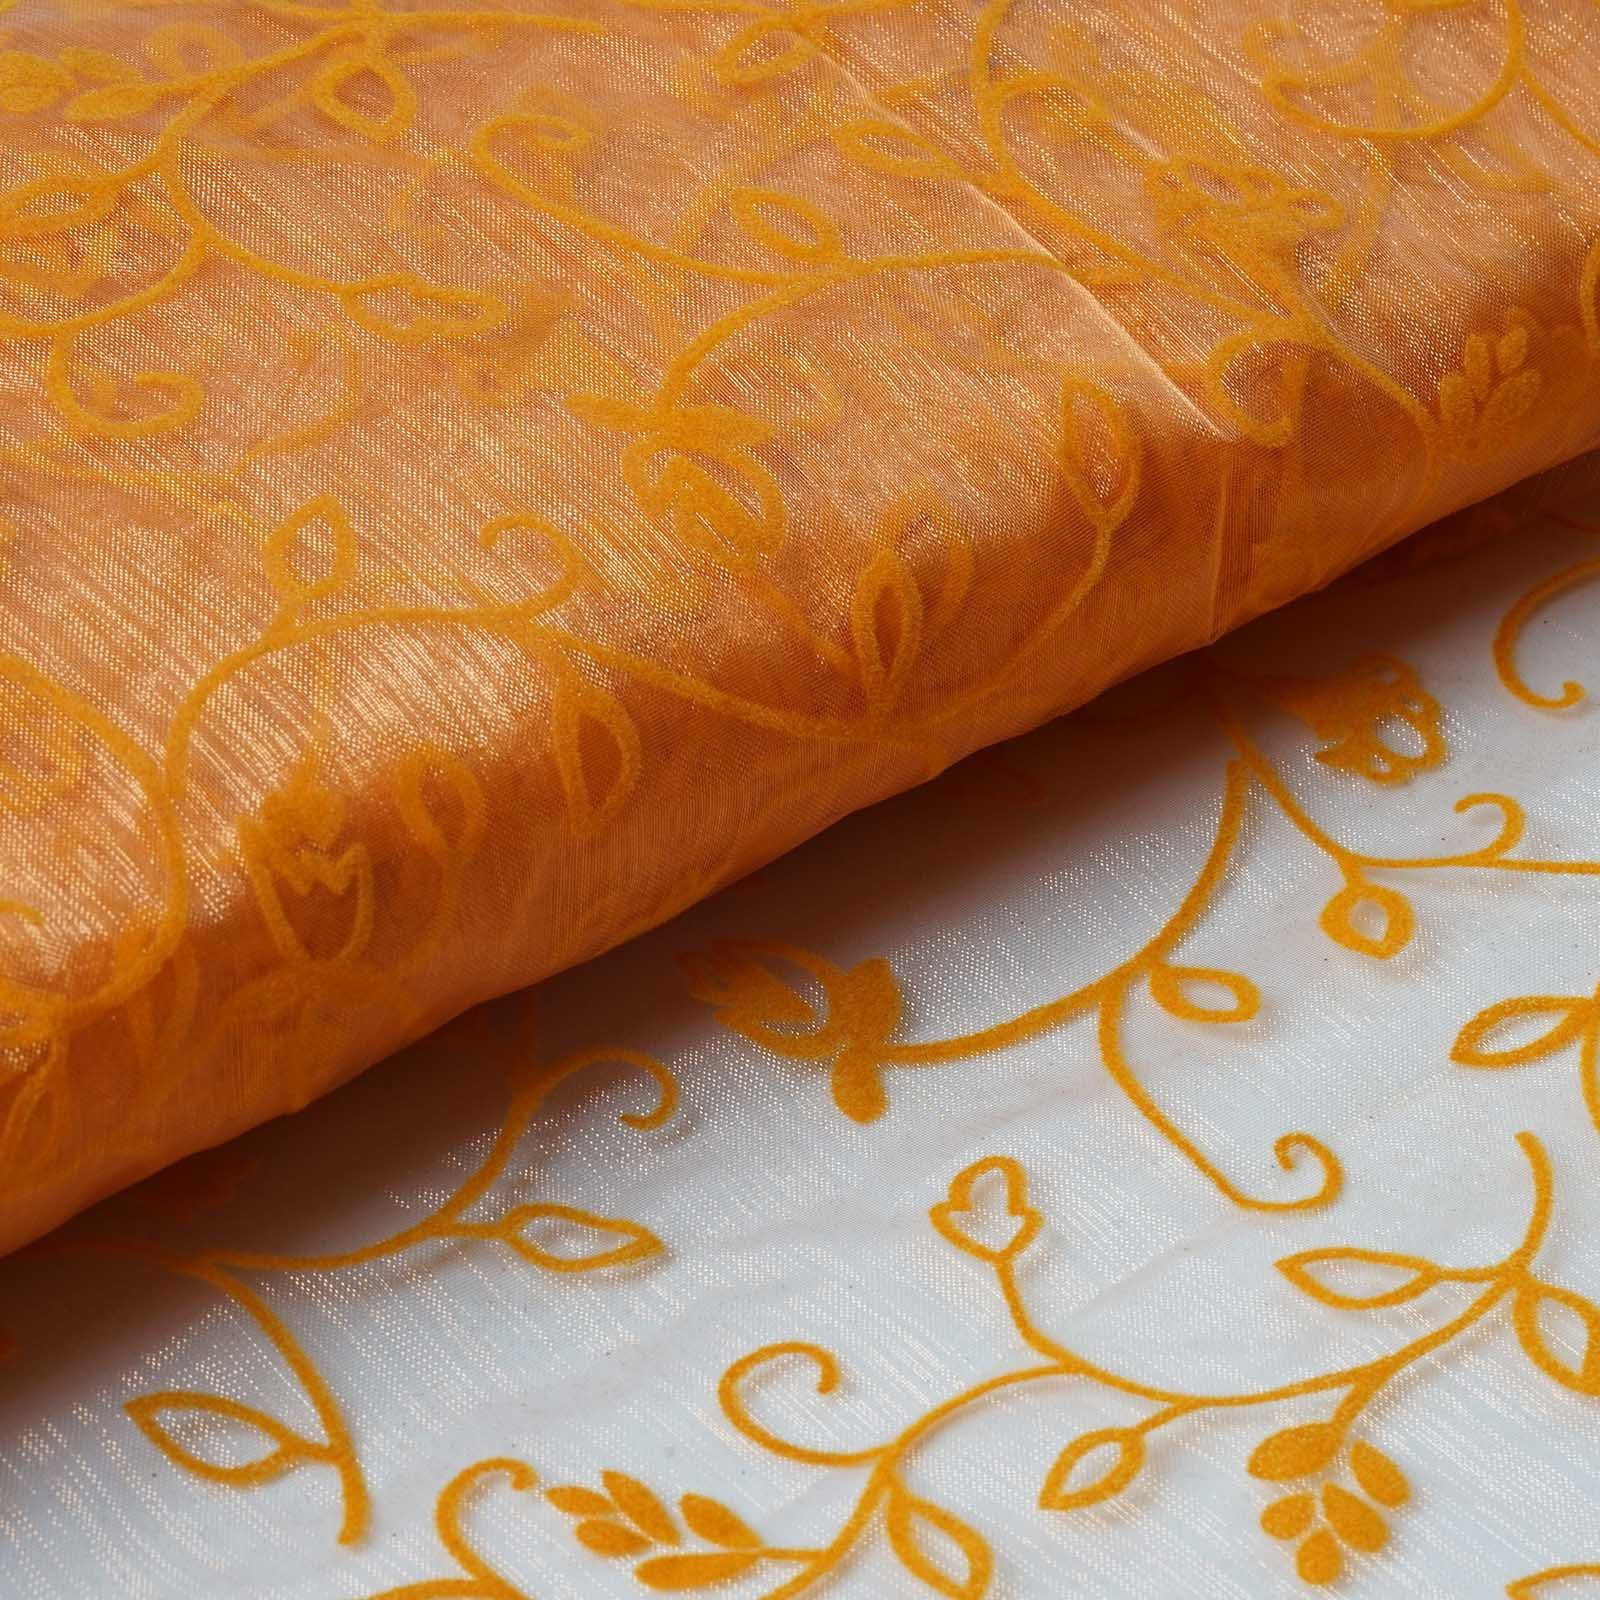 Orange SHINY POLYESTER FABRIC BOLT 54" x 10 yards DIY Favors Bows Crafts Sewing 